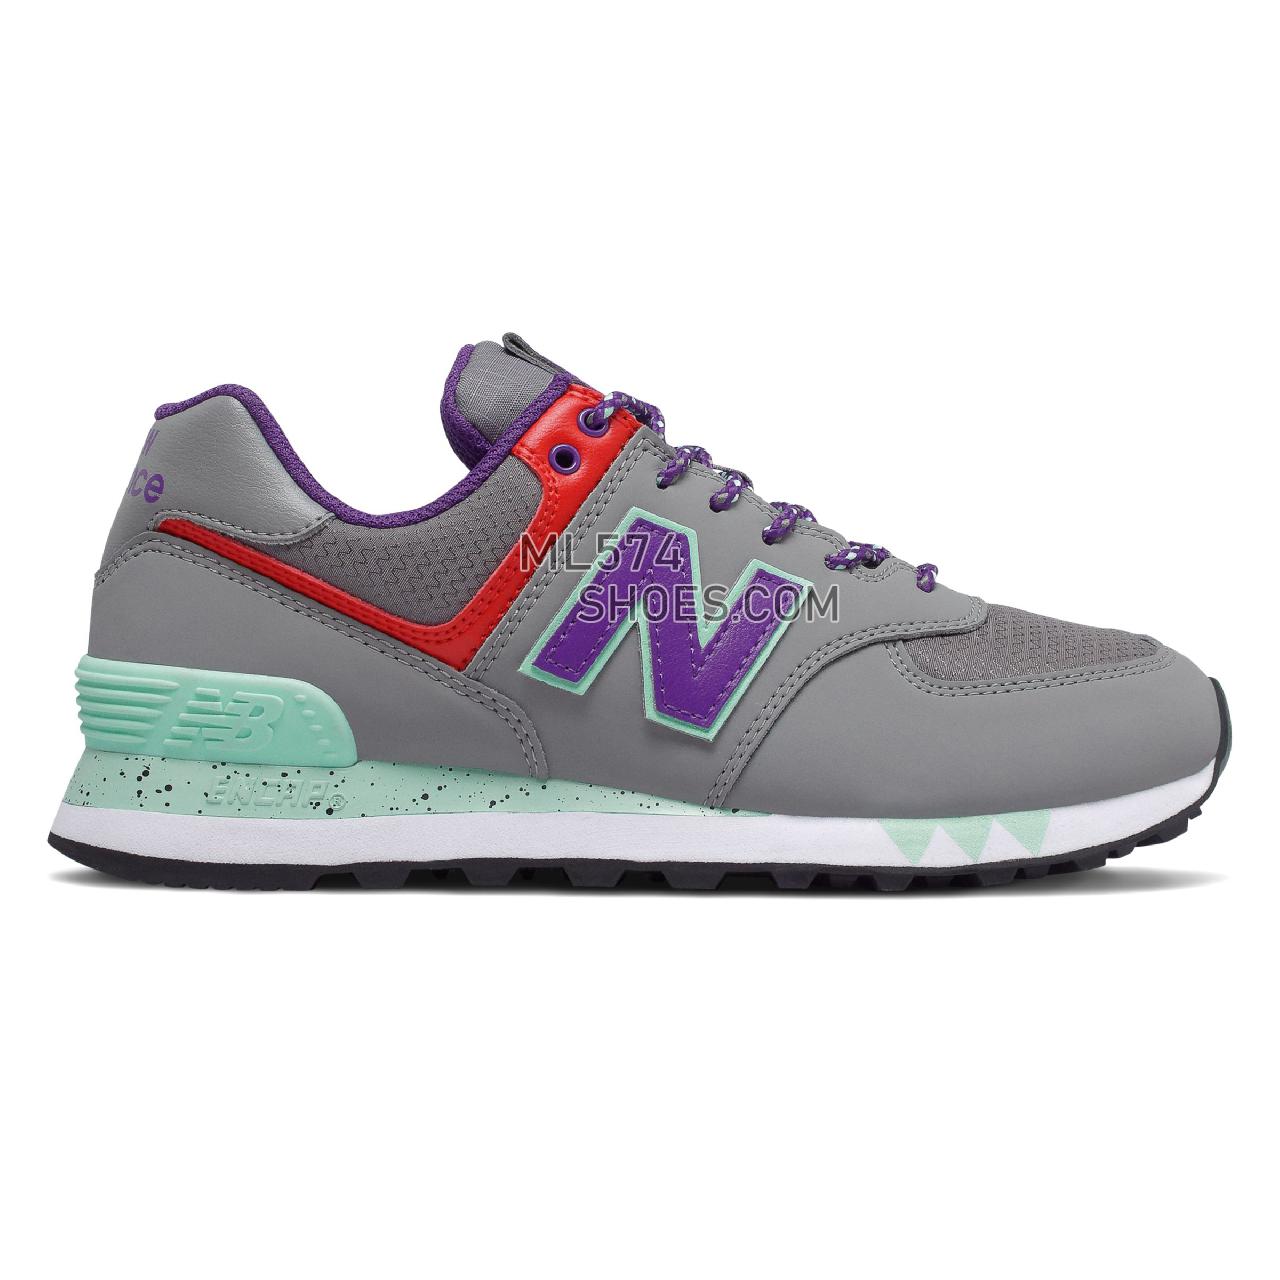 New Balance 574 - Women's Classic Sneakers - Marblehead with Prism Purple - WL574WOA